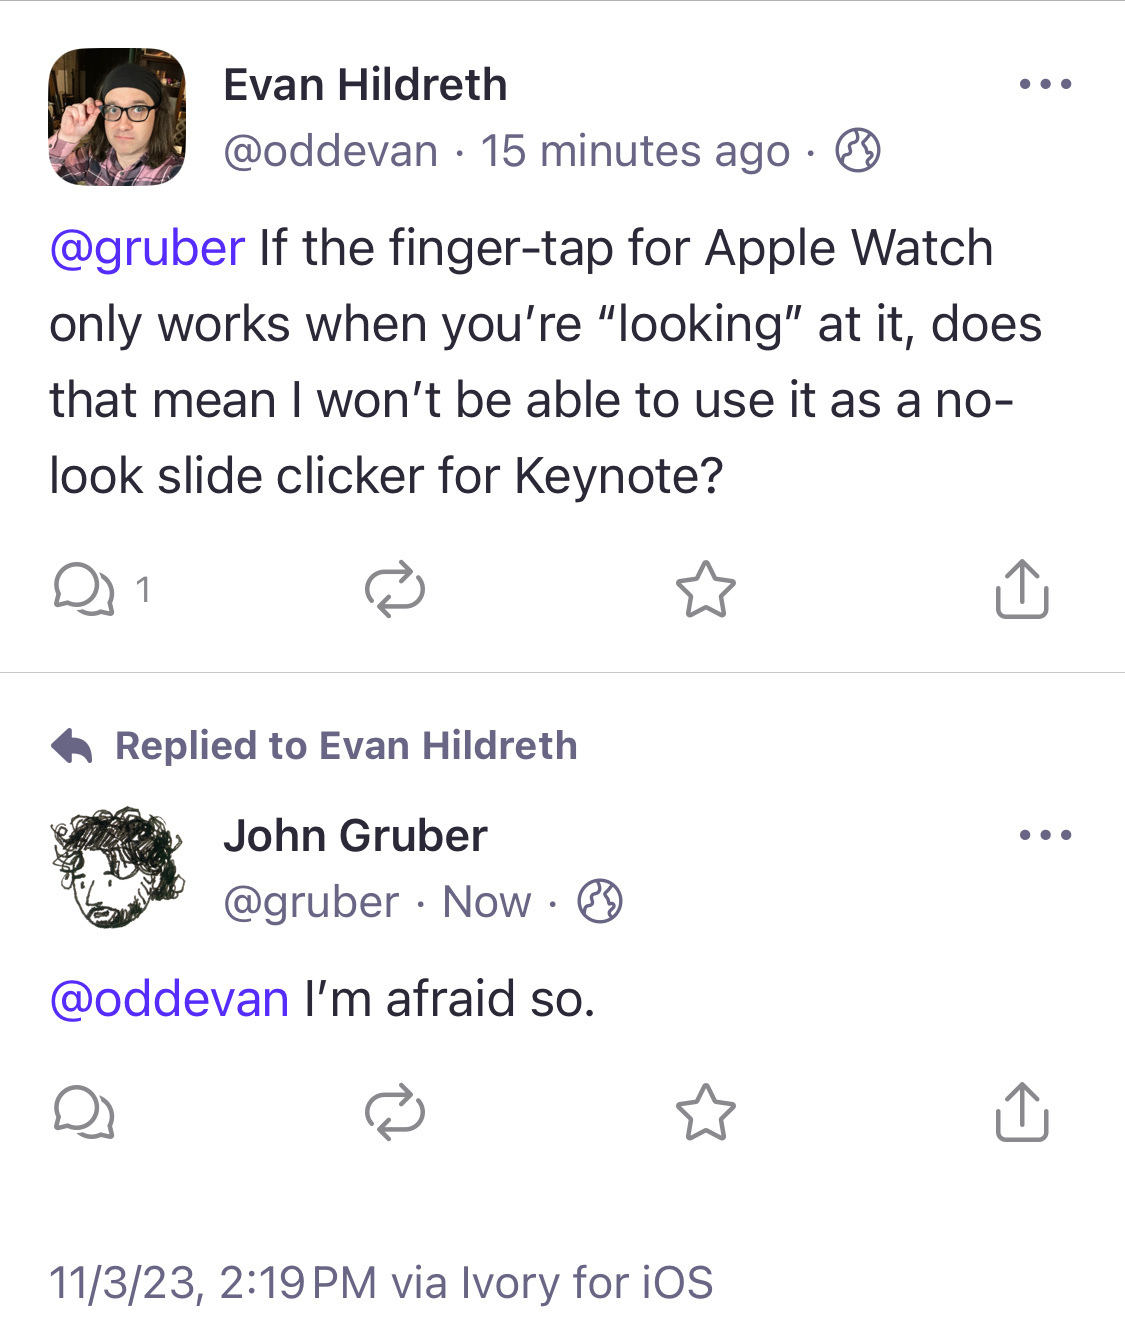 Screenshot from Mastodon. Evan asks: if the finger tap for the Apple Watch only works when it’s being looked at, does that mean it can’t be used as a no-look slide clicker? John Gruber responds in the affirmative.